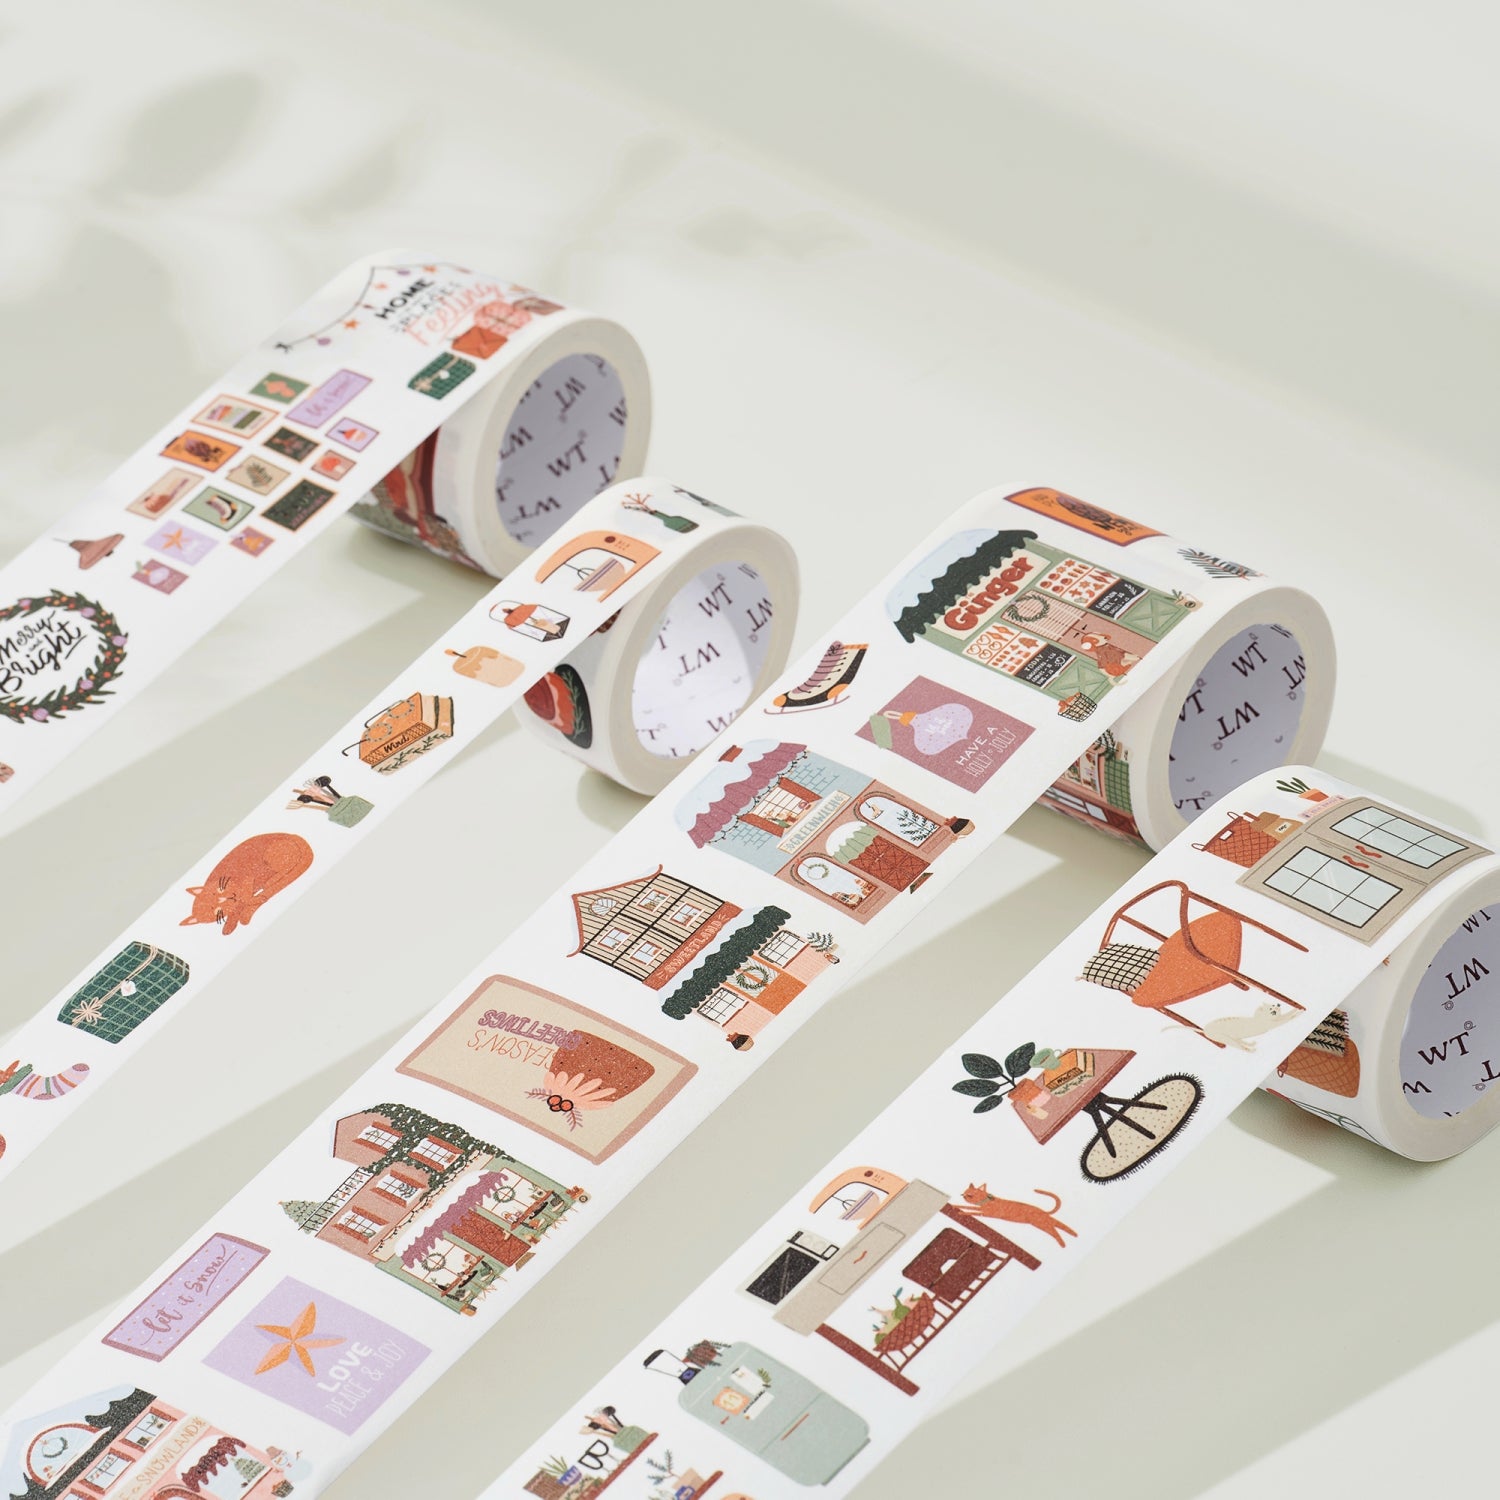 Home Sweet Home Washi Tape Sticker Set | The Washi Tape Shop. Beautiful Washi and Decorative Tape For Bullet Journals, Gift Wrapping, Planner Decoration and DIY Projects